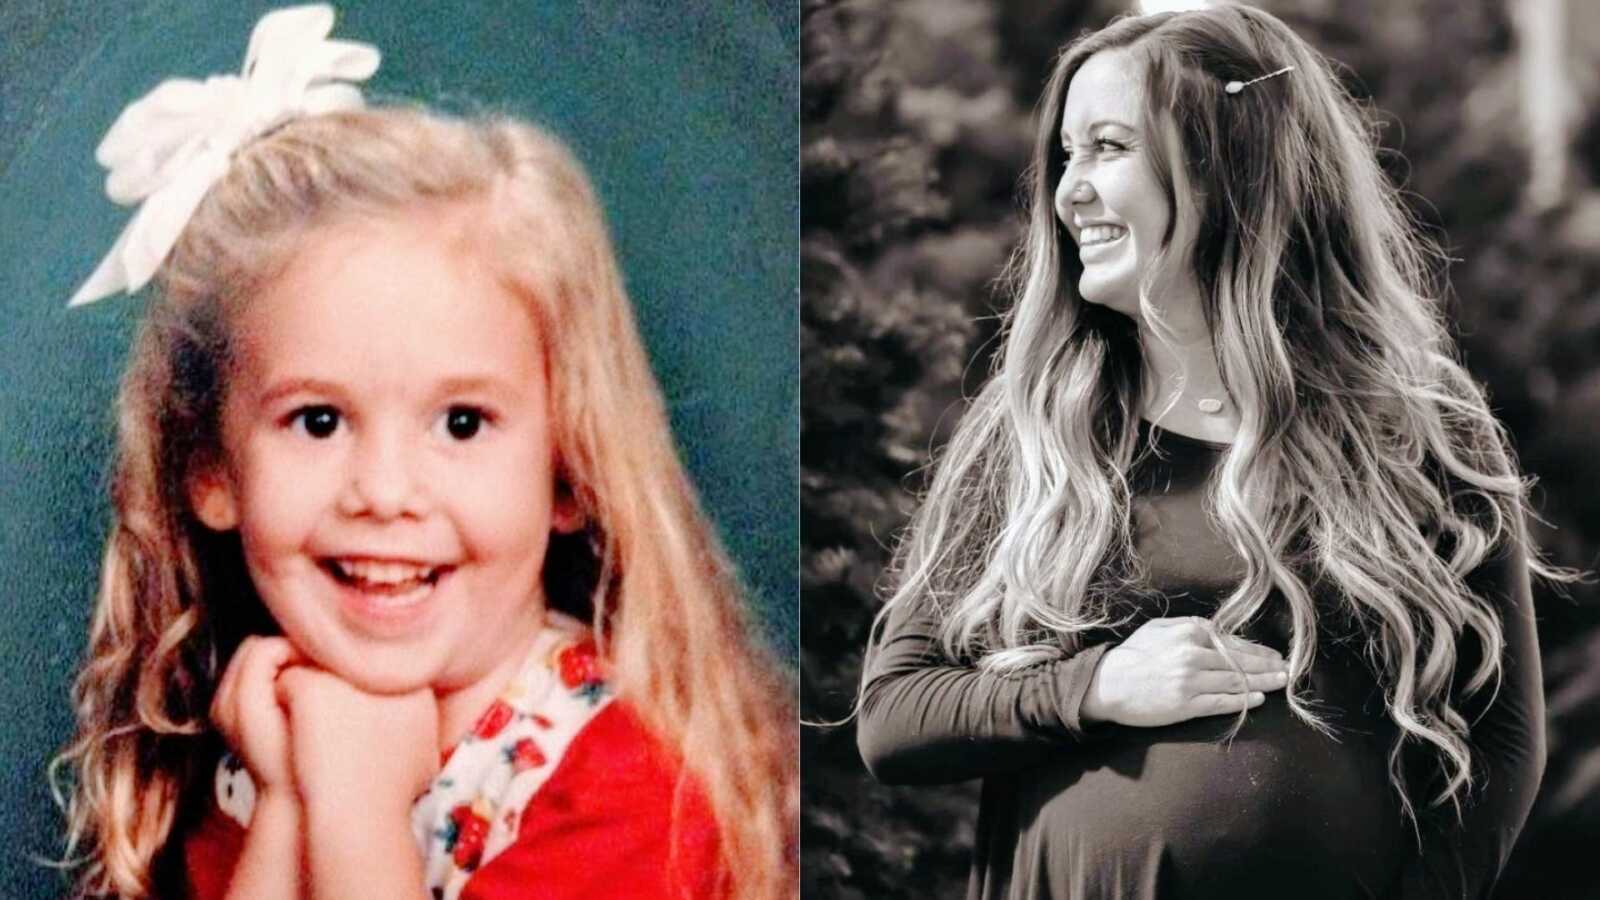 Little girl poses for a school photo on the left, same girl now a woman smiles big while pregnant with her first child